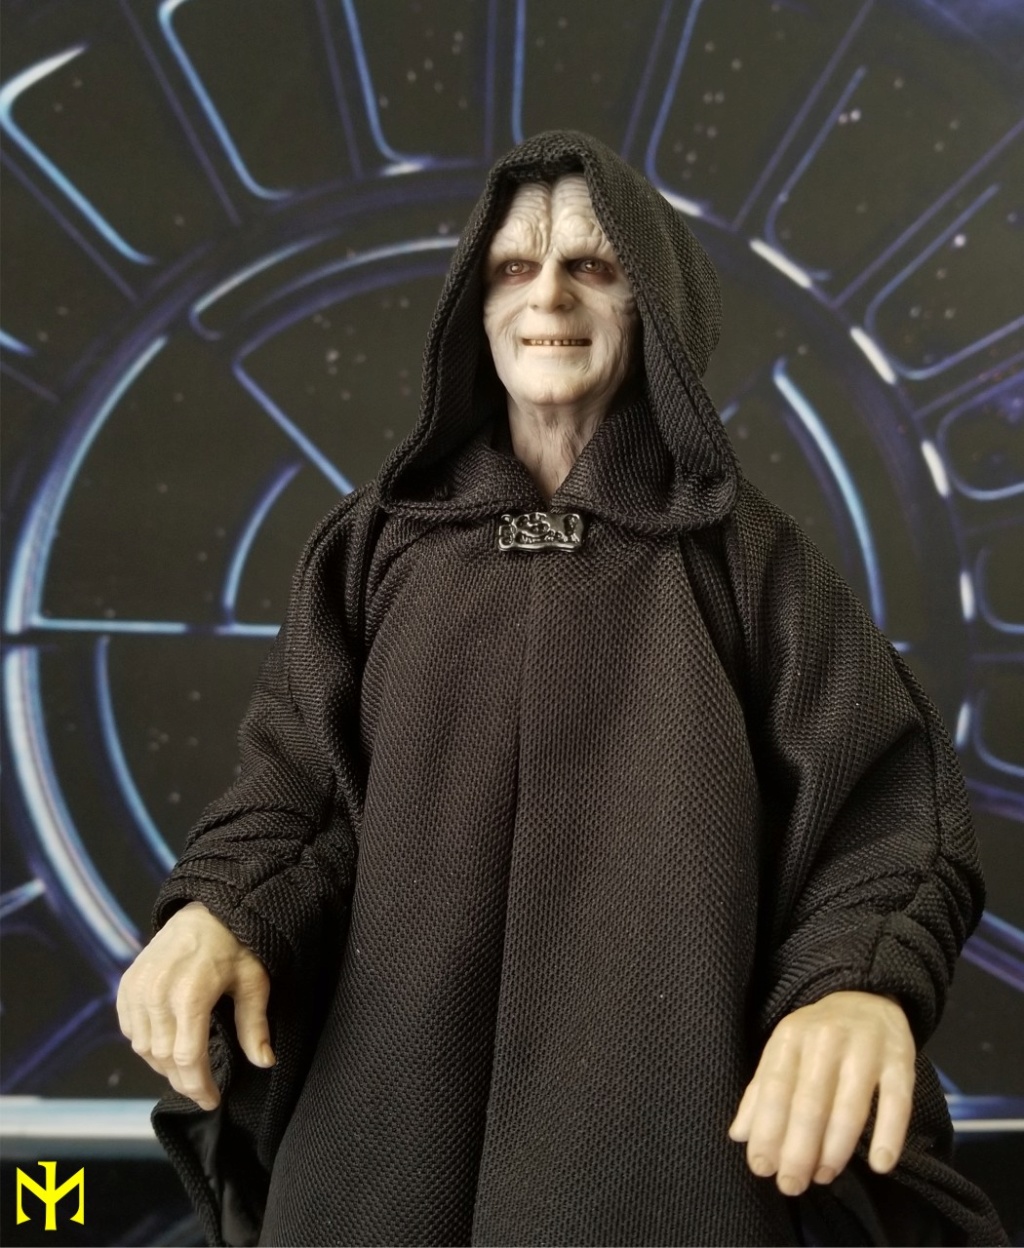 HotToys - Hot Toys Star Wars Emperor Palpatine (Deluxe) Review Htep1710